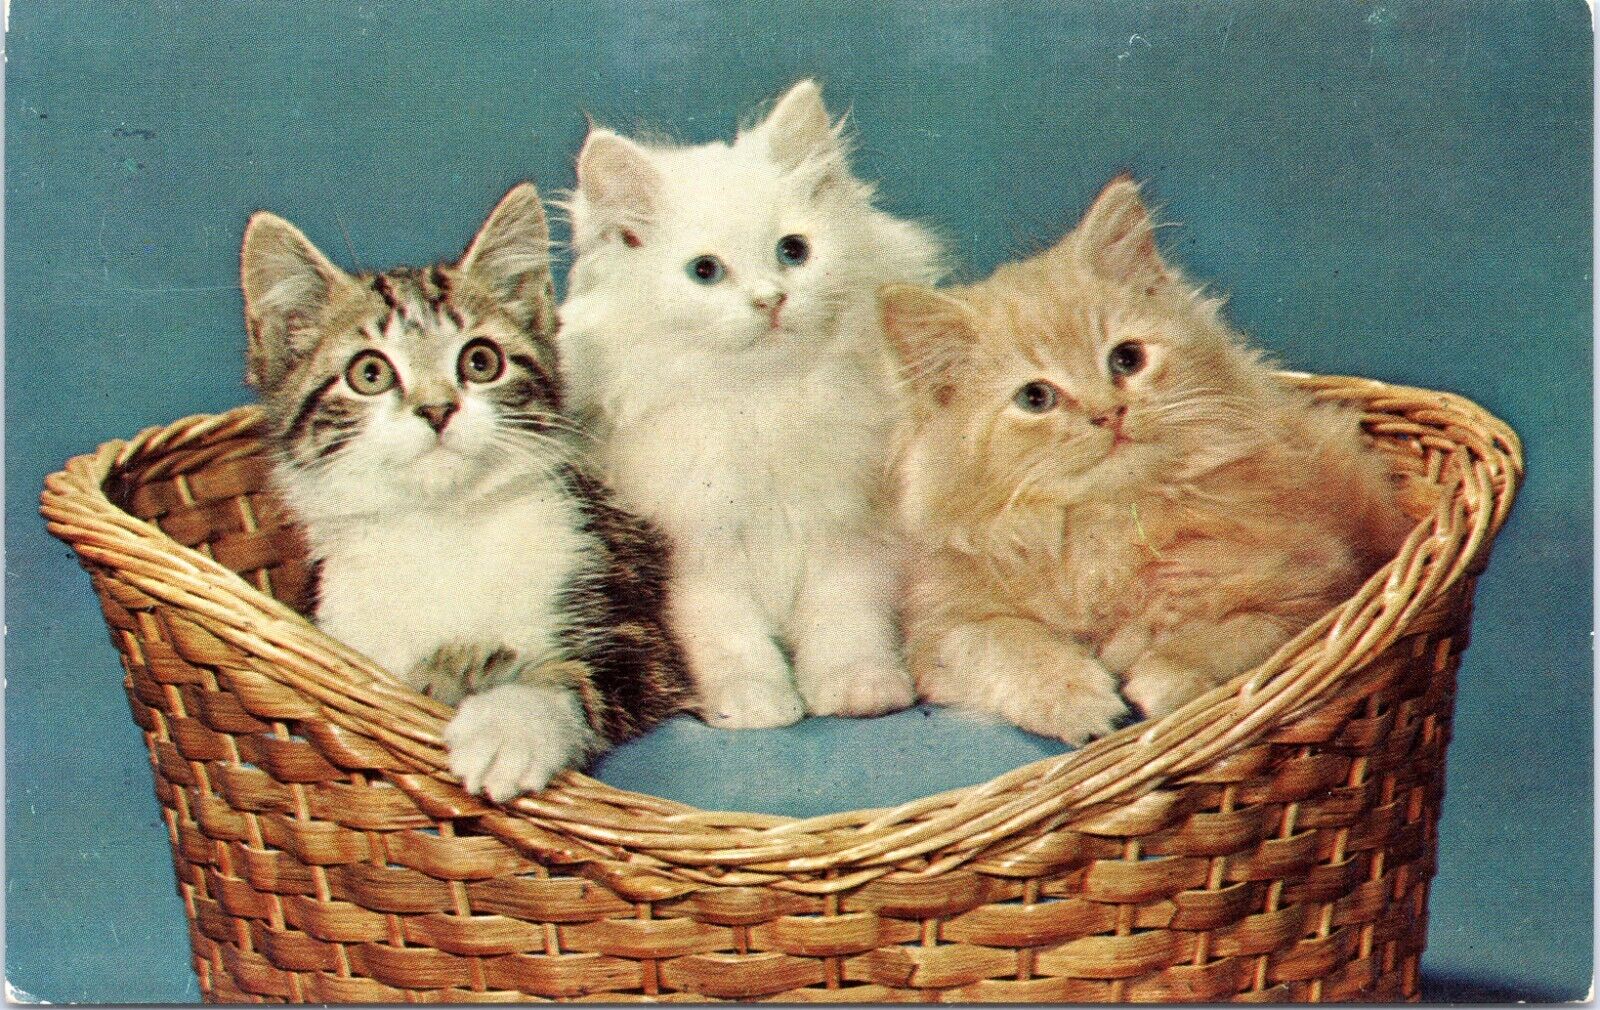 c1960\'s Three Kittens in a Basket, Vintage Chrome Postcard, adorable cats